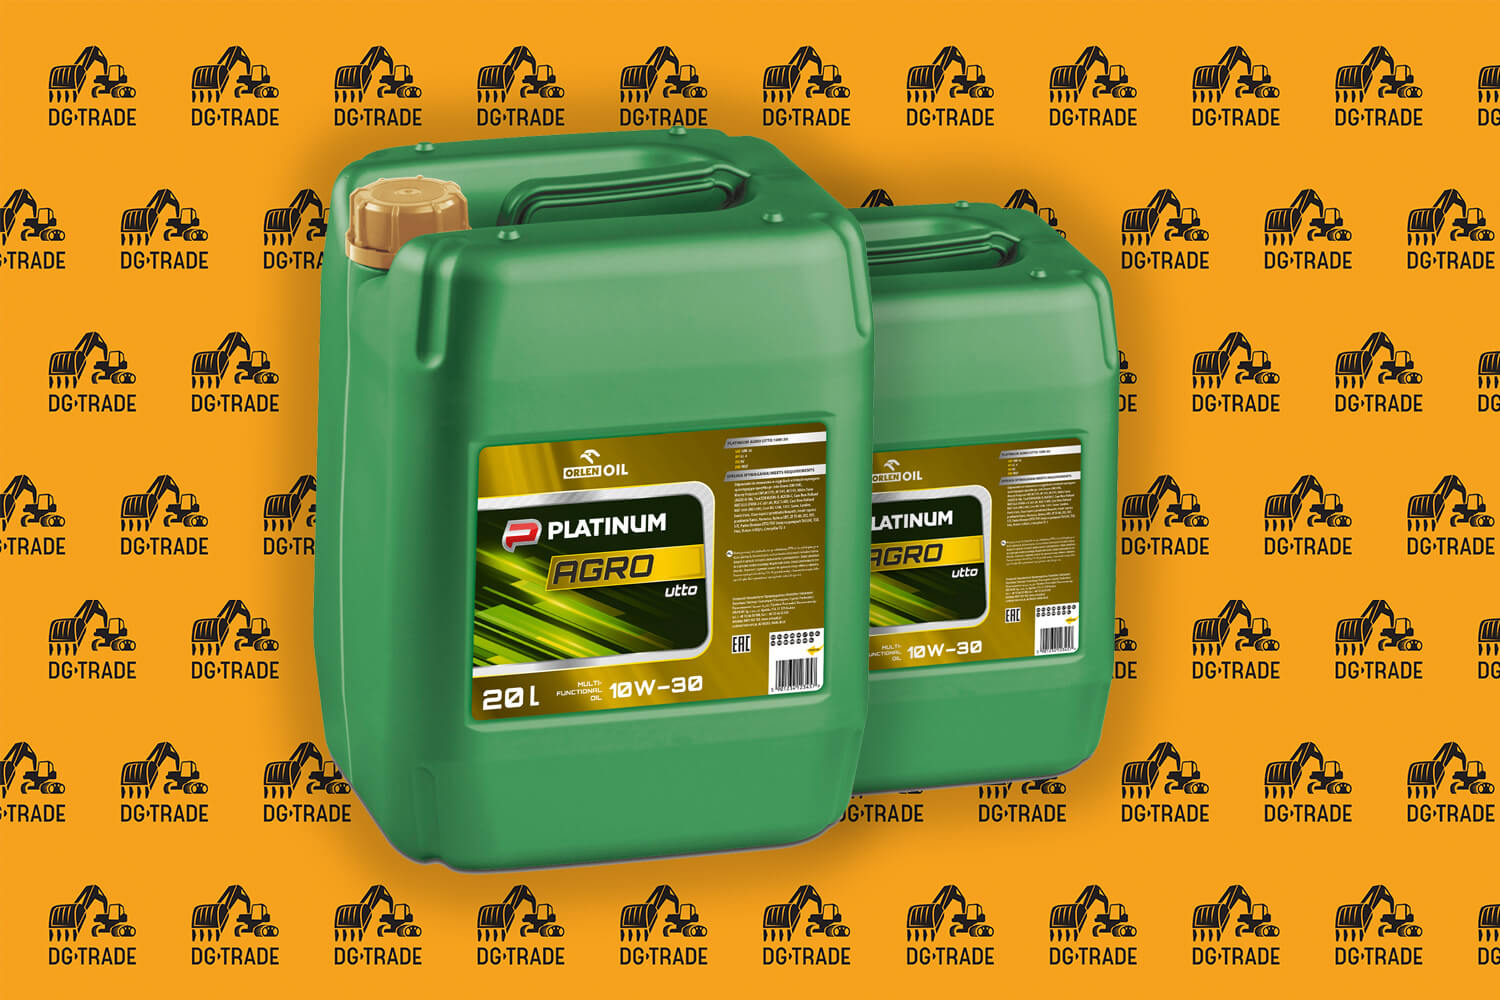 Масло utto 10w 30. UTTO w10w30. Масло гидротрансмиссионное 10w30 UTTO. G-Special UTTO 10w30 20л. Orlen Oil Agro UTTO 10w-30 10 л.